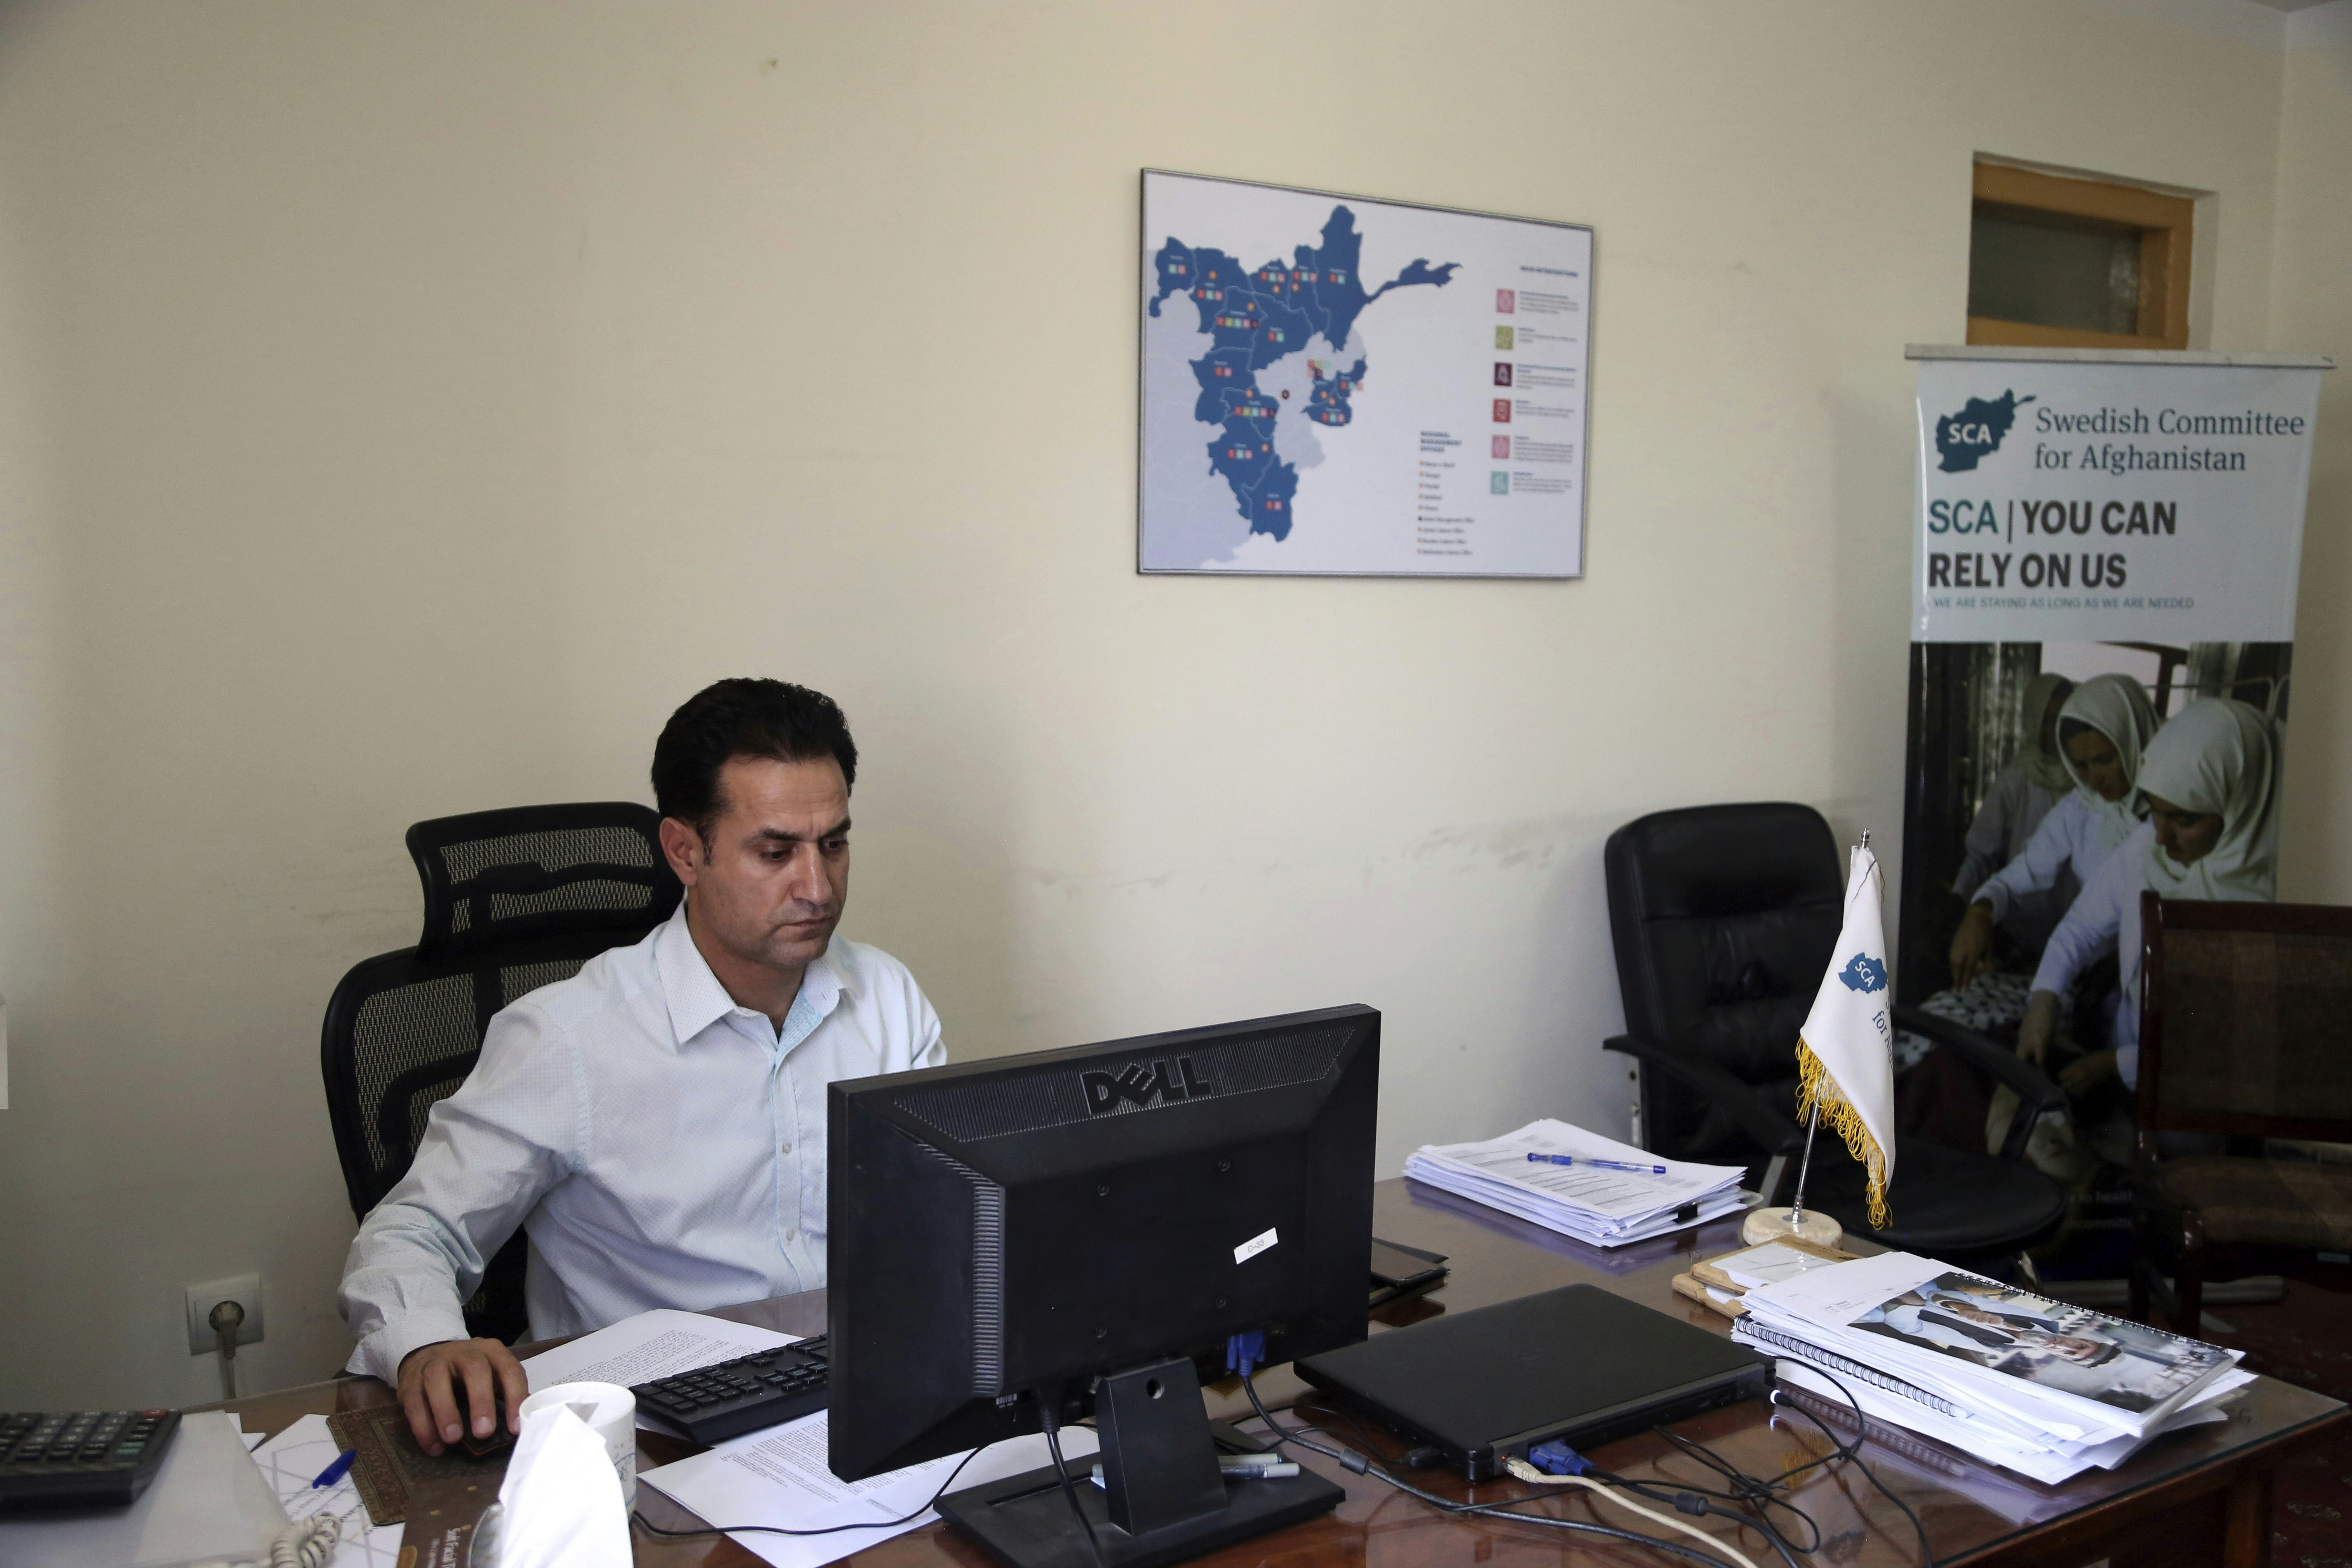 Ahmad Khalid Fahim, program director for the Swedish group, works at his desk, during an interview with the Associated Press in Kabul, Afghanistan, Wednesday, July 17, 2019. A Swedish non-governmental organization in Afghanistan says the Taliban have forced the closure of 42 health facilities run by the non-profit group in eastern Maidan Wardan province. (AP Photo/Rahmat Gul)